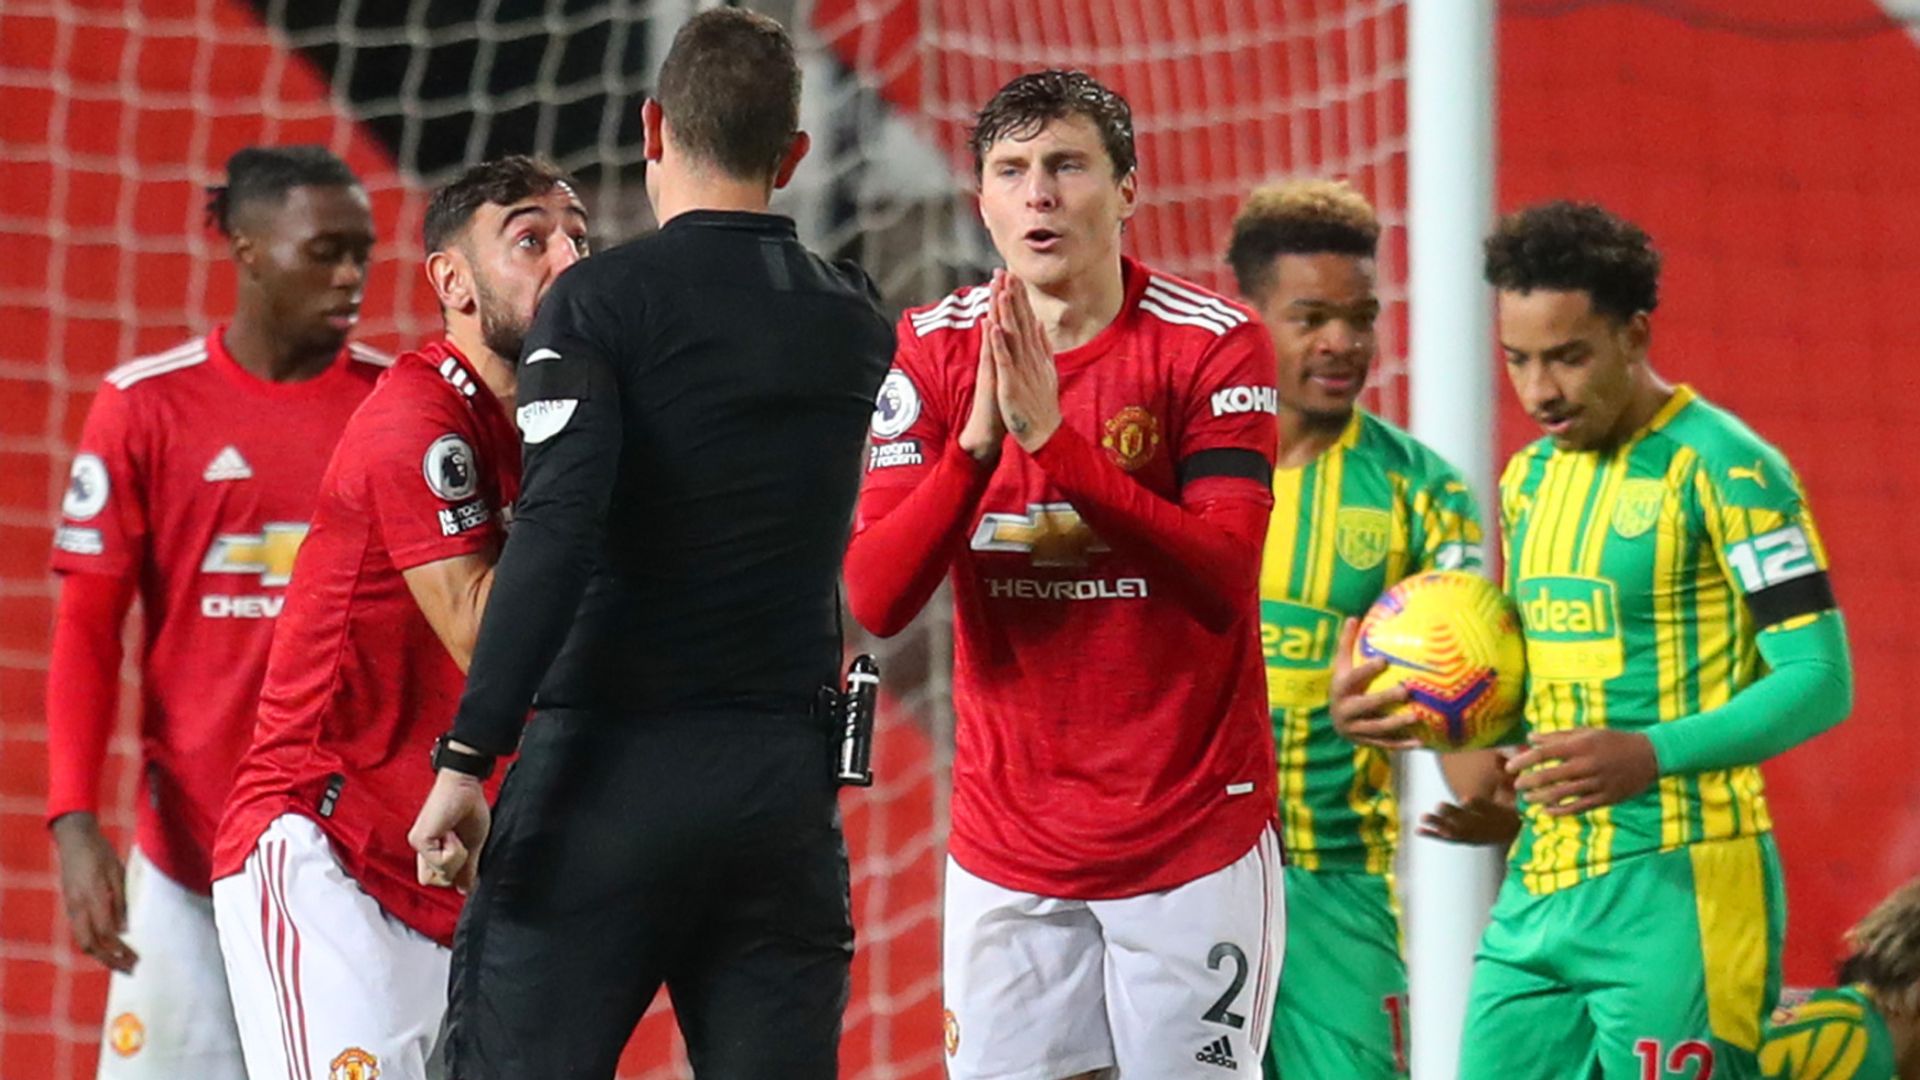 Man Utd edge West Brom after Coote penalty chaos